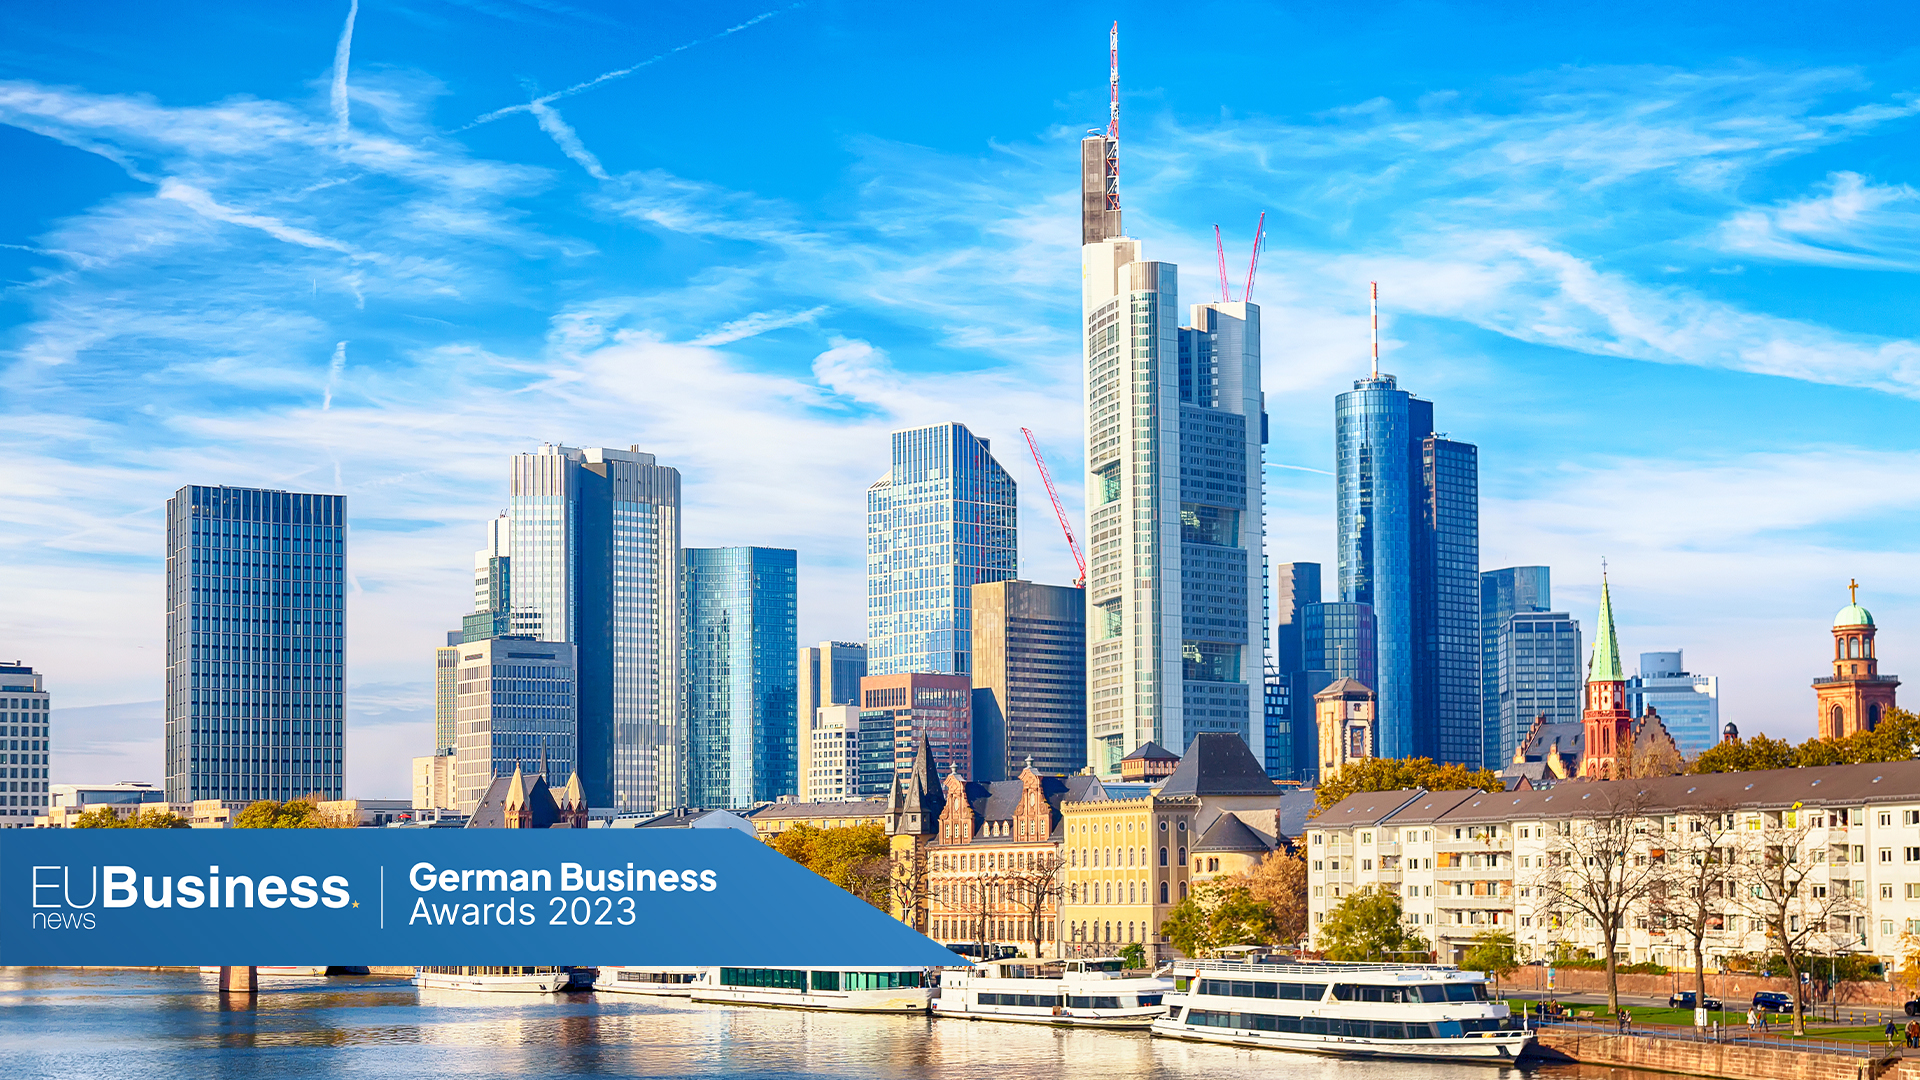 Skyline cityscape of Frankfurt, Germany during sunny day. Frankfurt Main in a financial capital of Europe